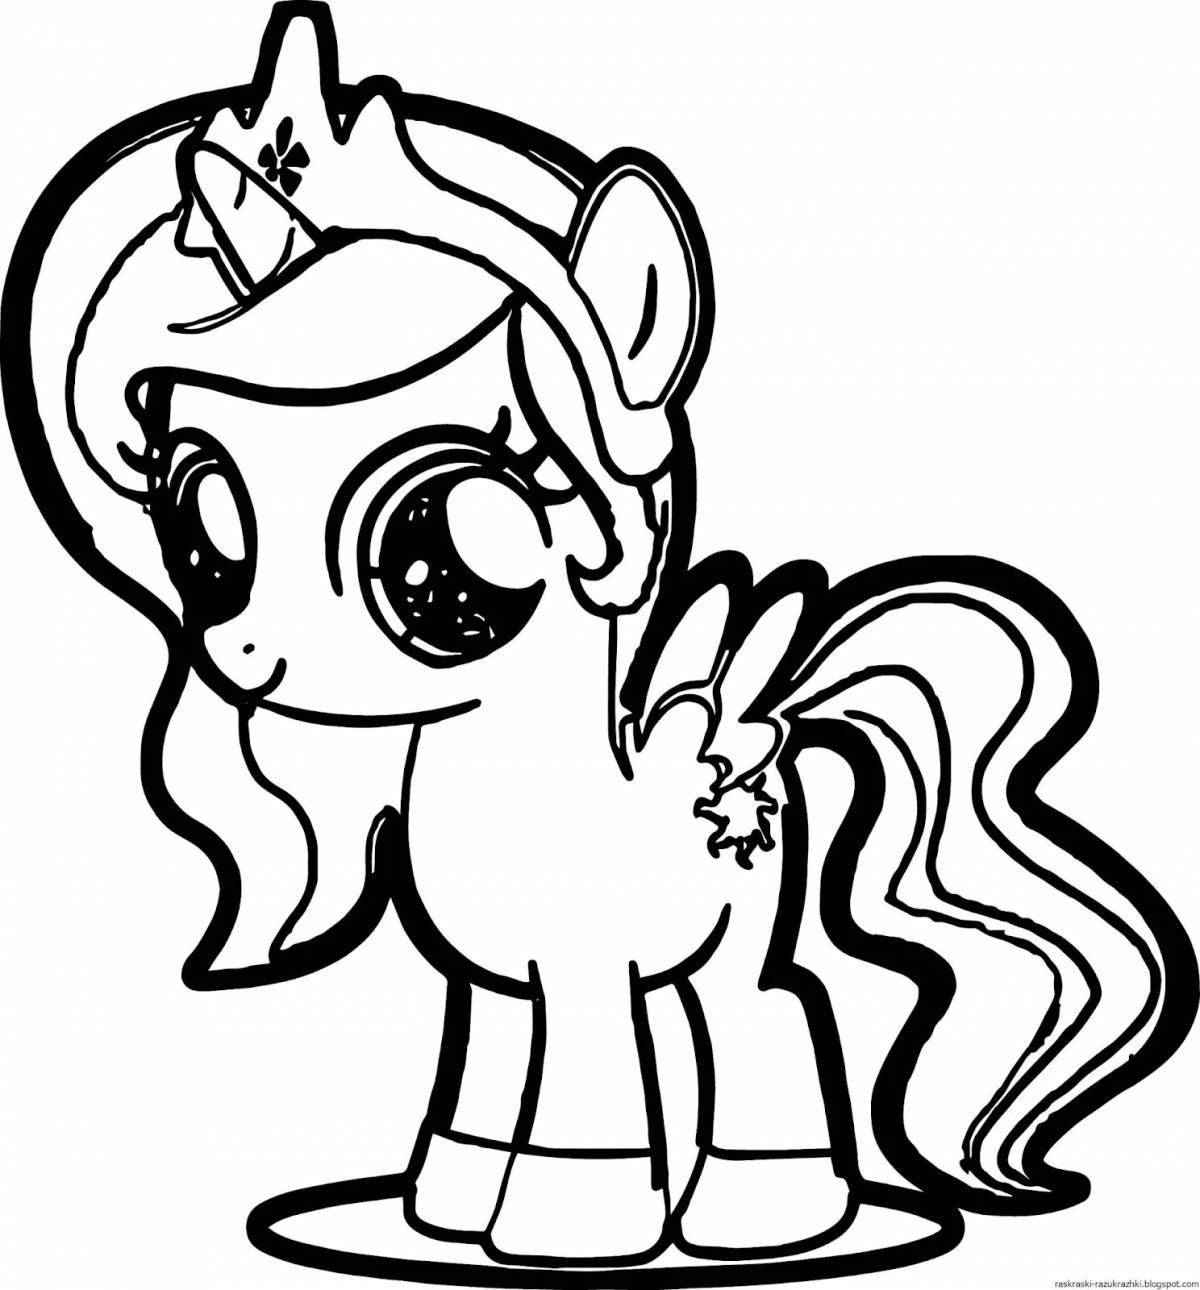 Radiant cute pony coloring for kids